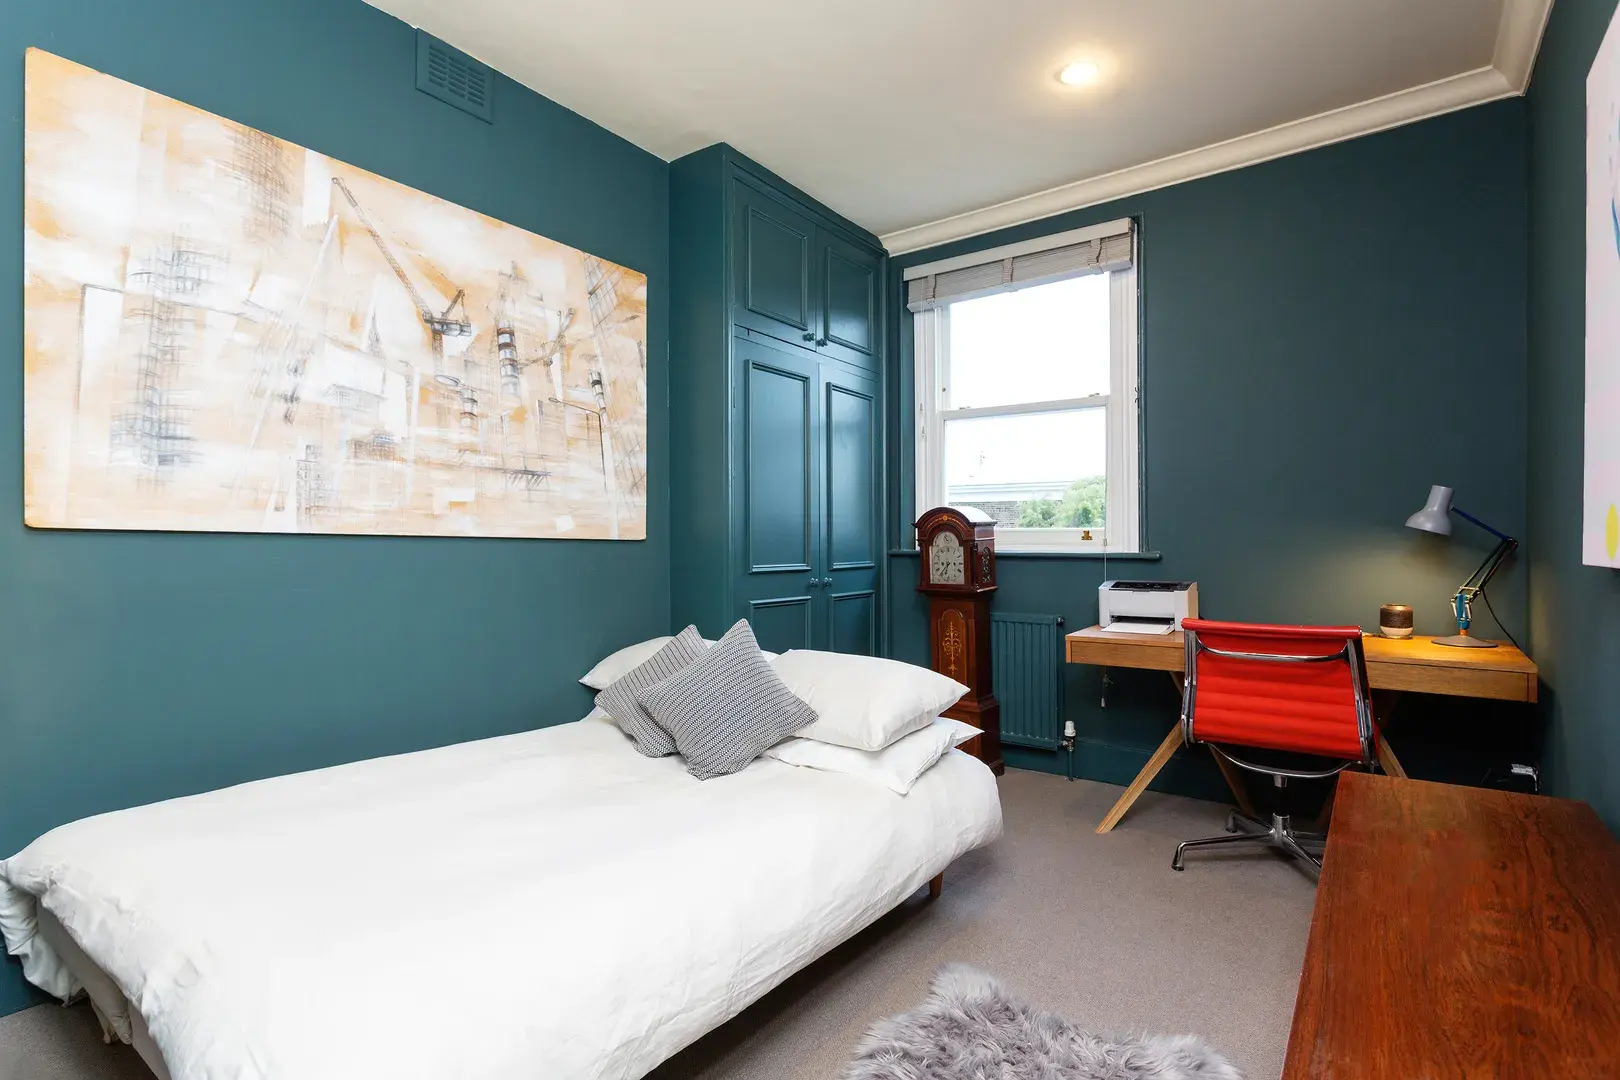 Fentiman Road II, holiday home in Brixton, London